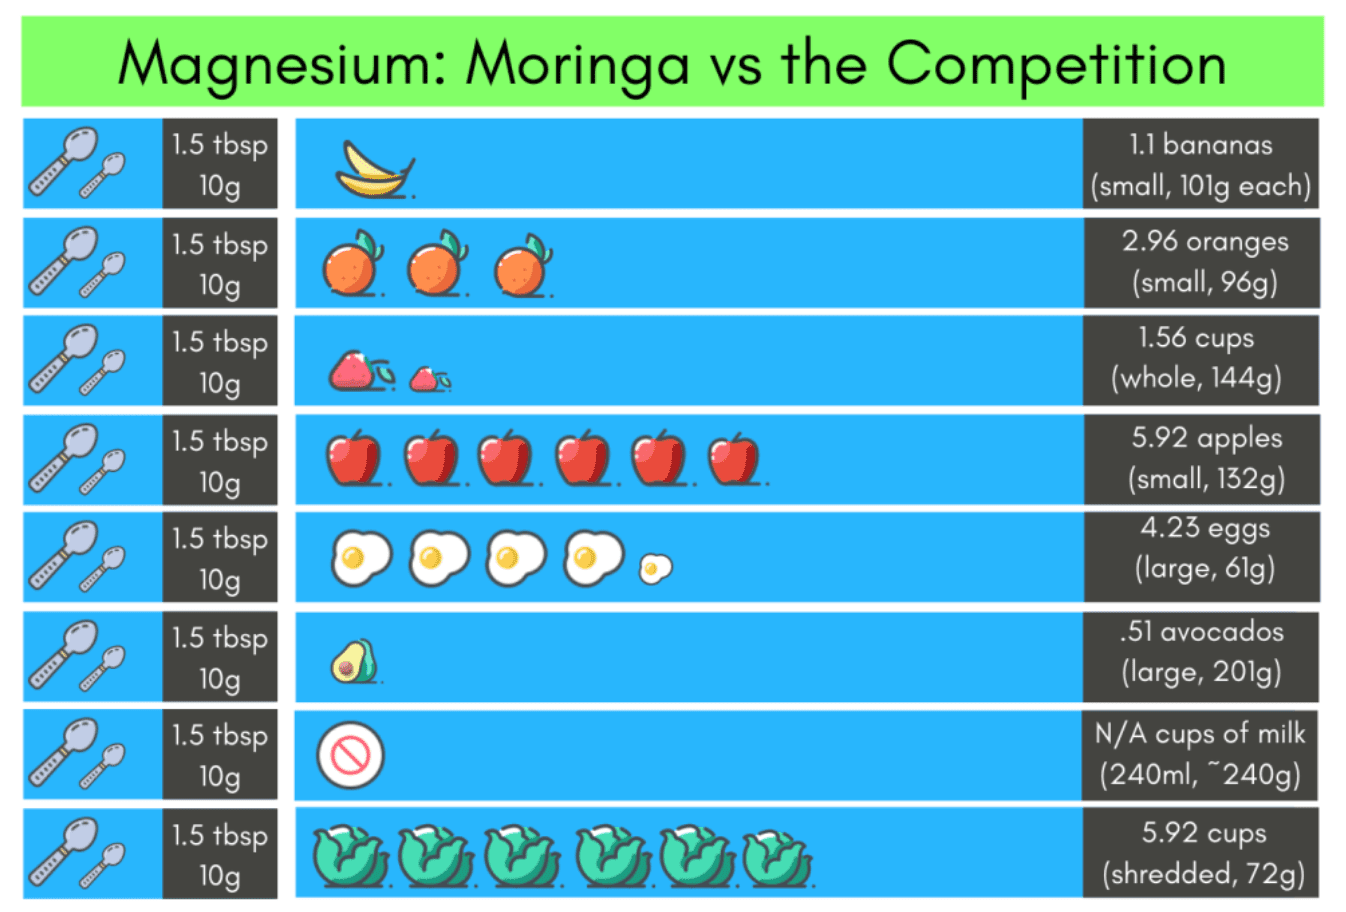 An image of Moringa vs the competition in magnesium